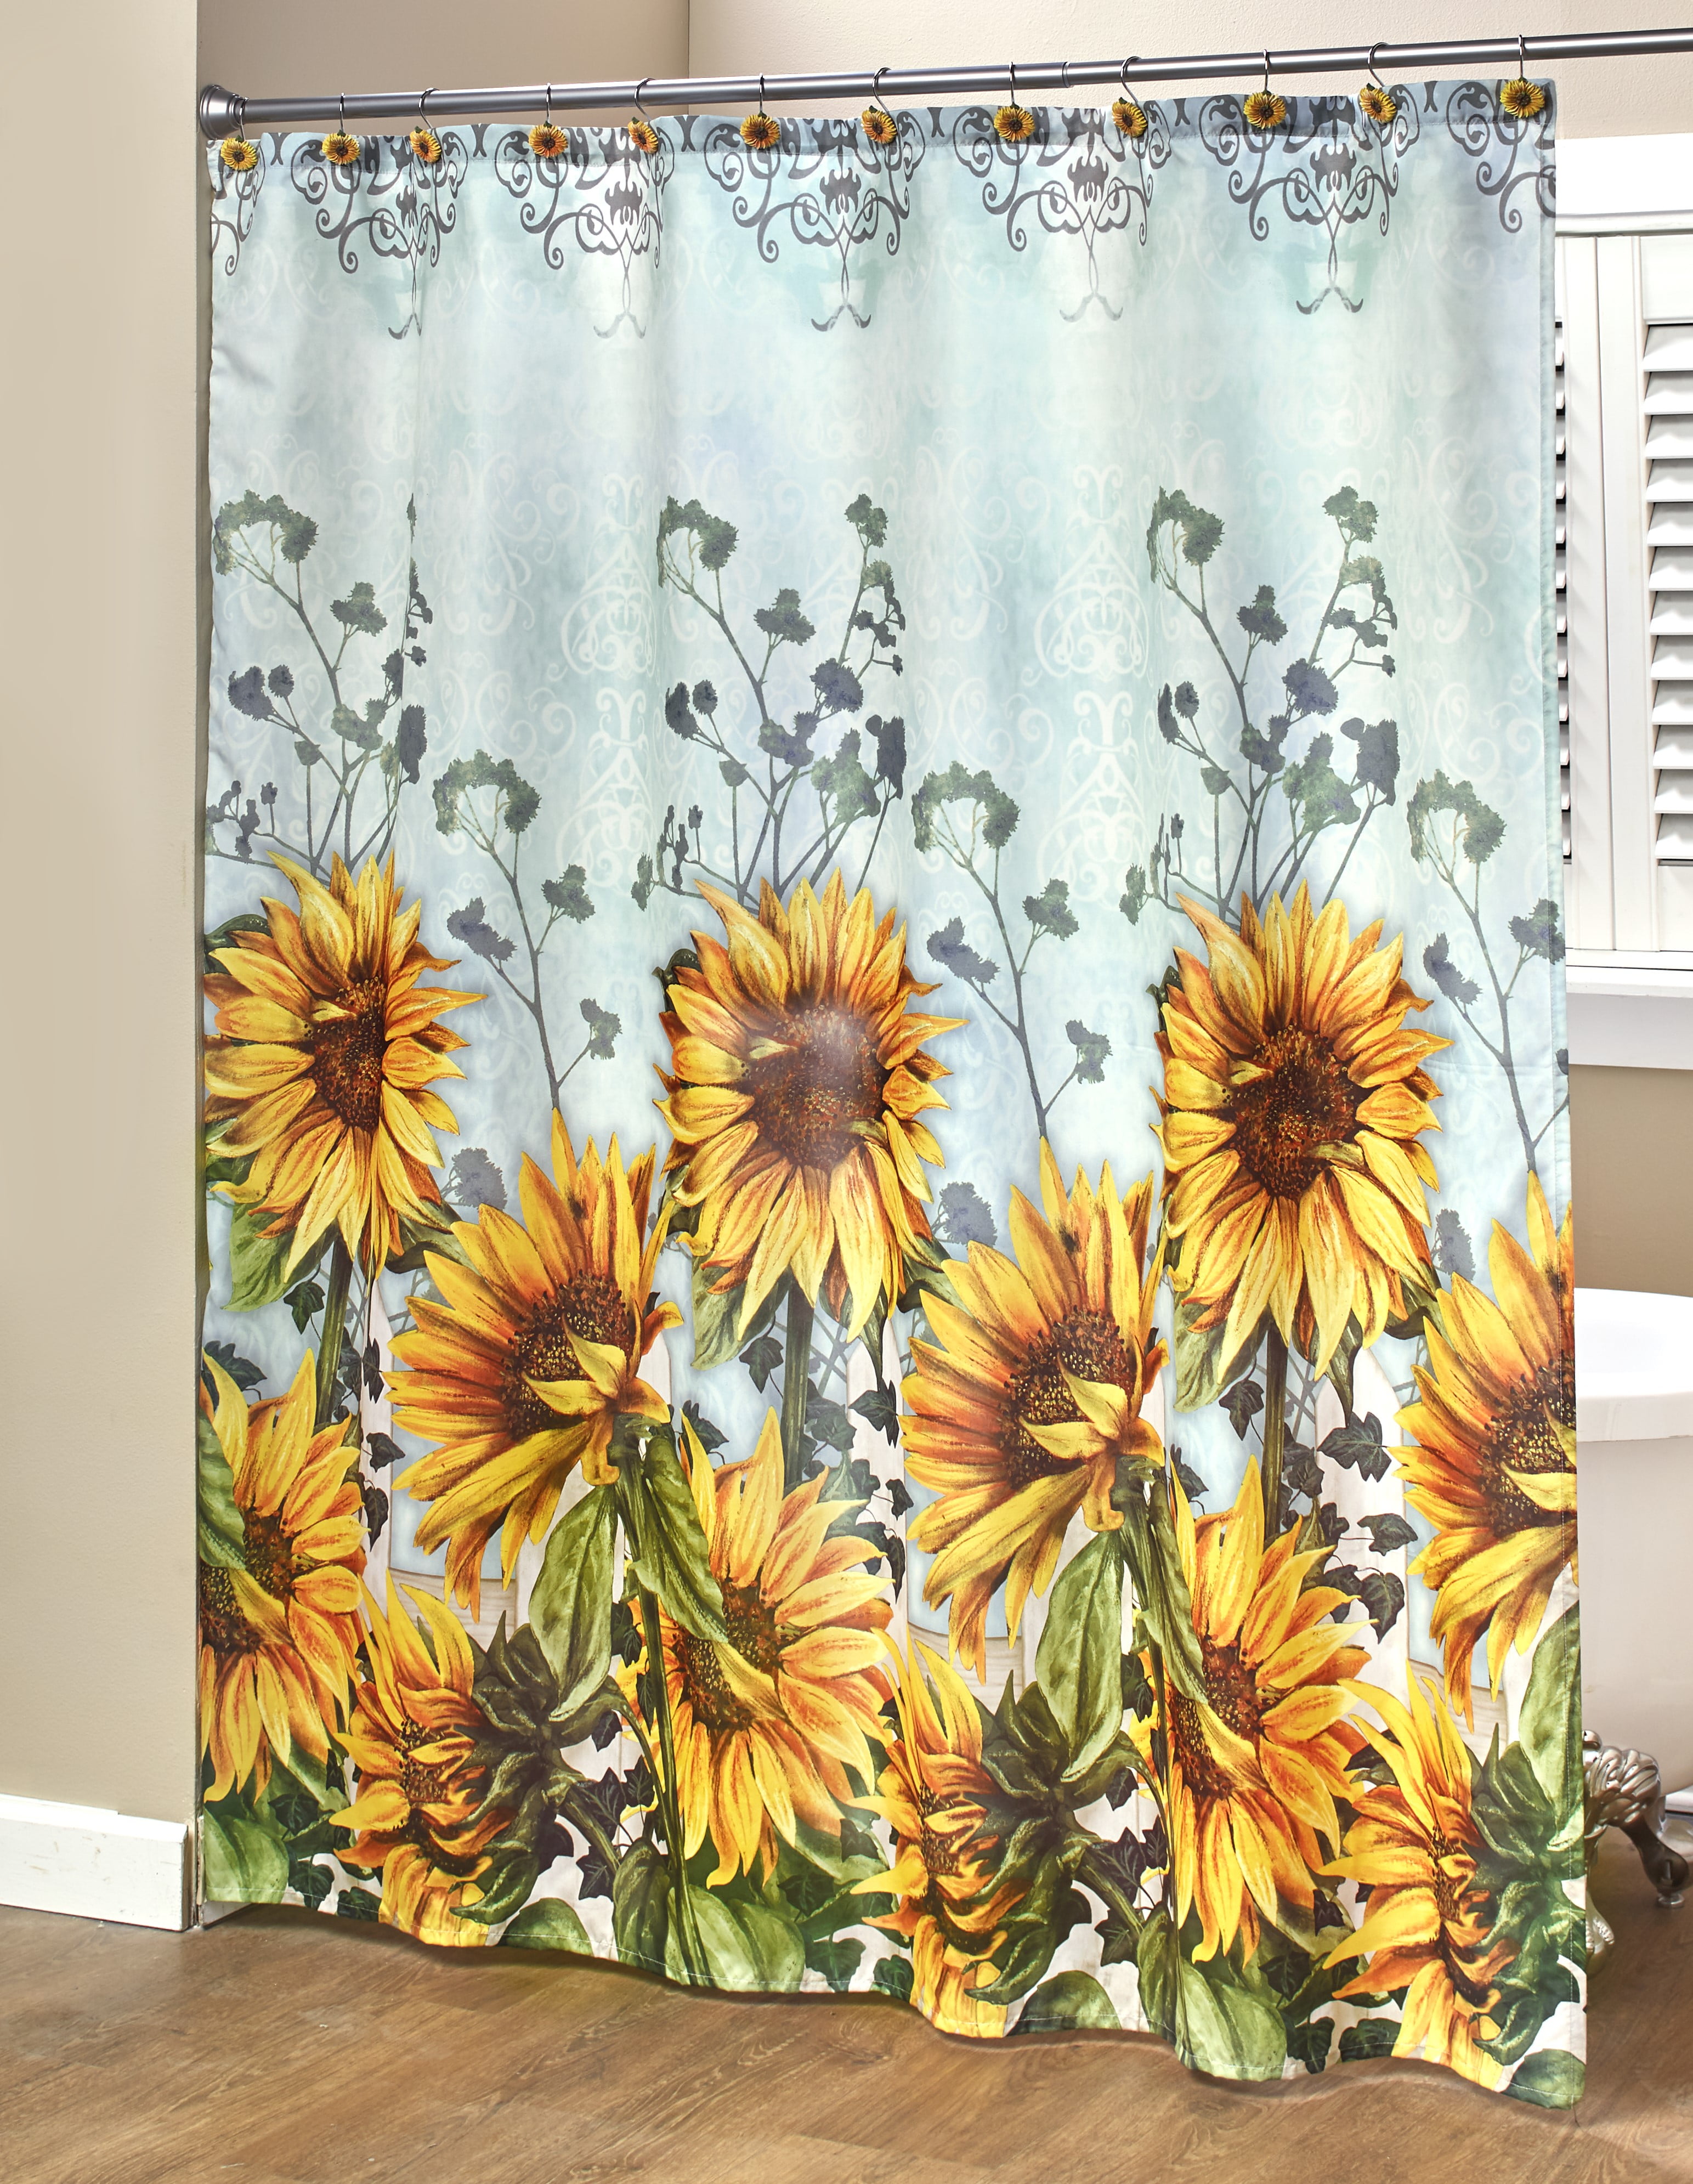 Color sunflower Shower Curtain Waterproof Polyester Fabric & 12Hooks 71*71in 